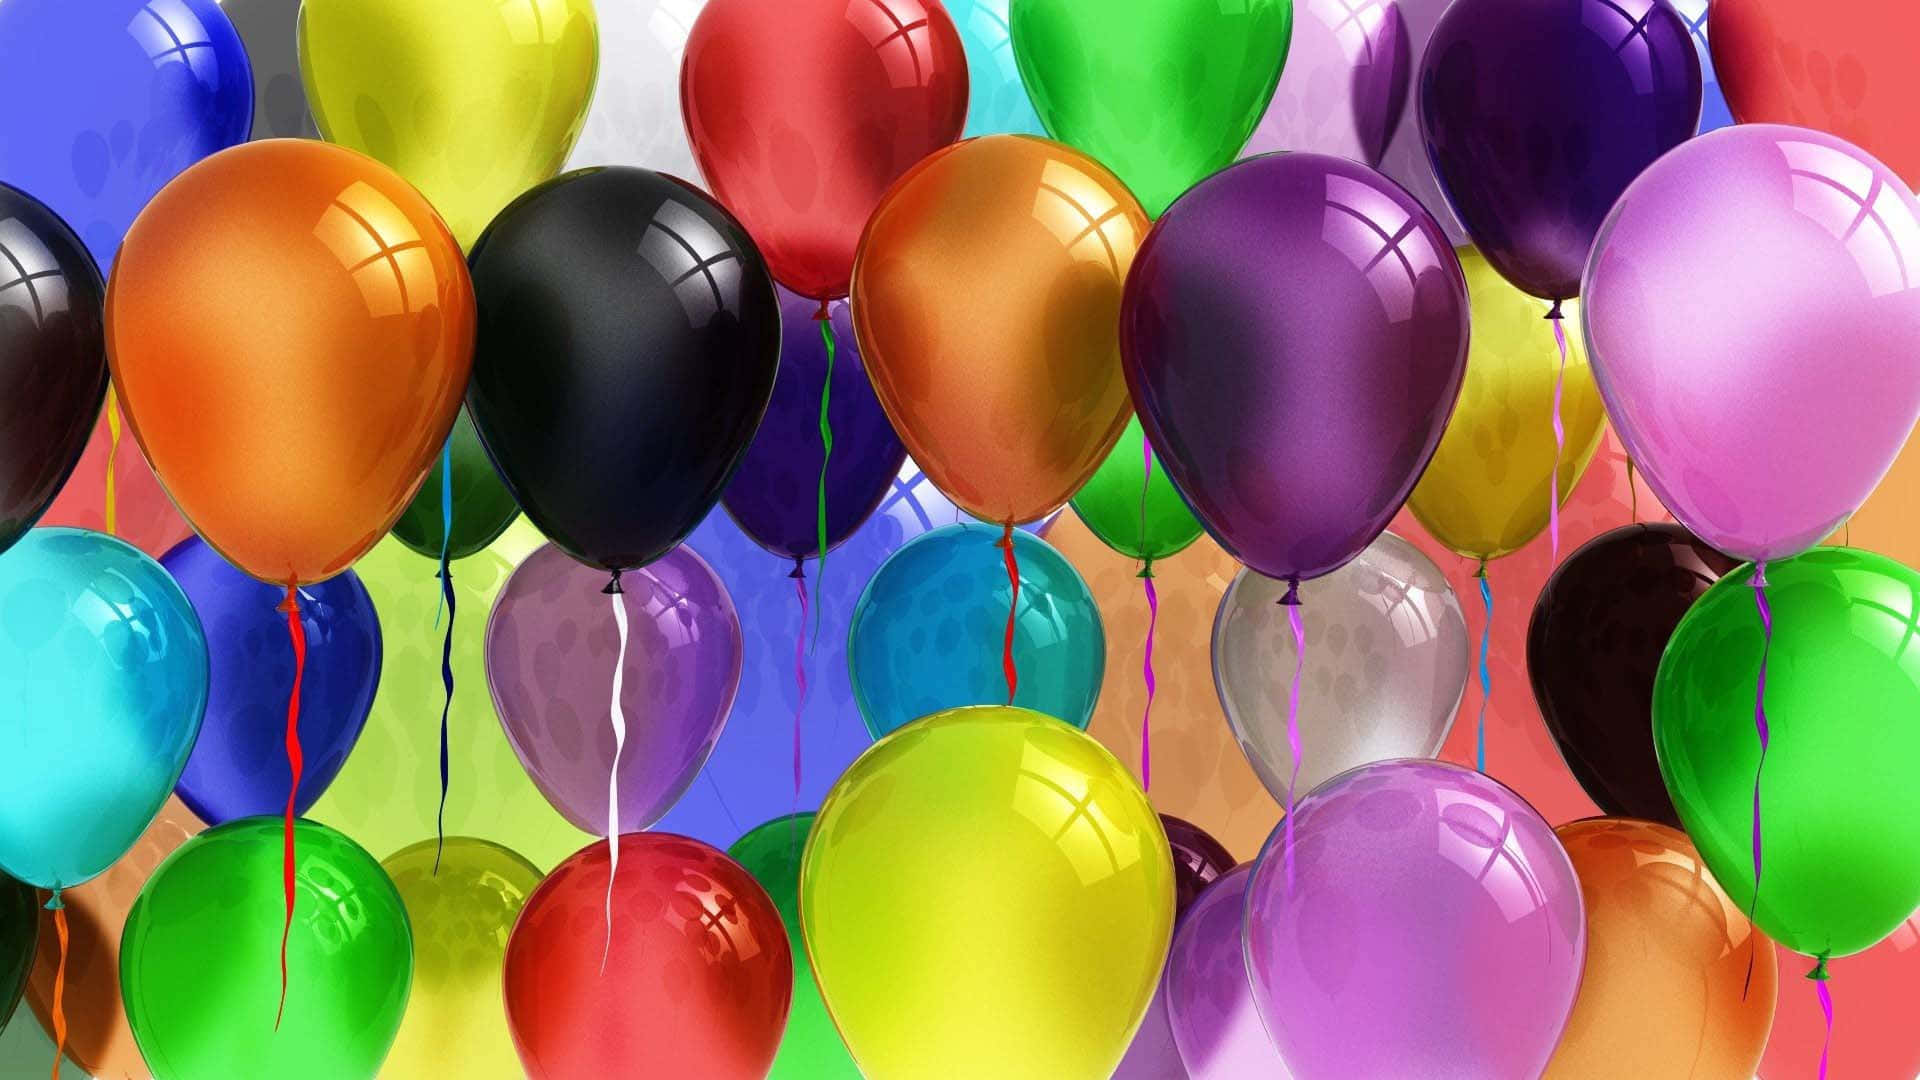 Birthday Balloons Colorful Aesthetic Picture